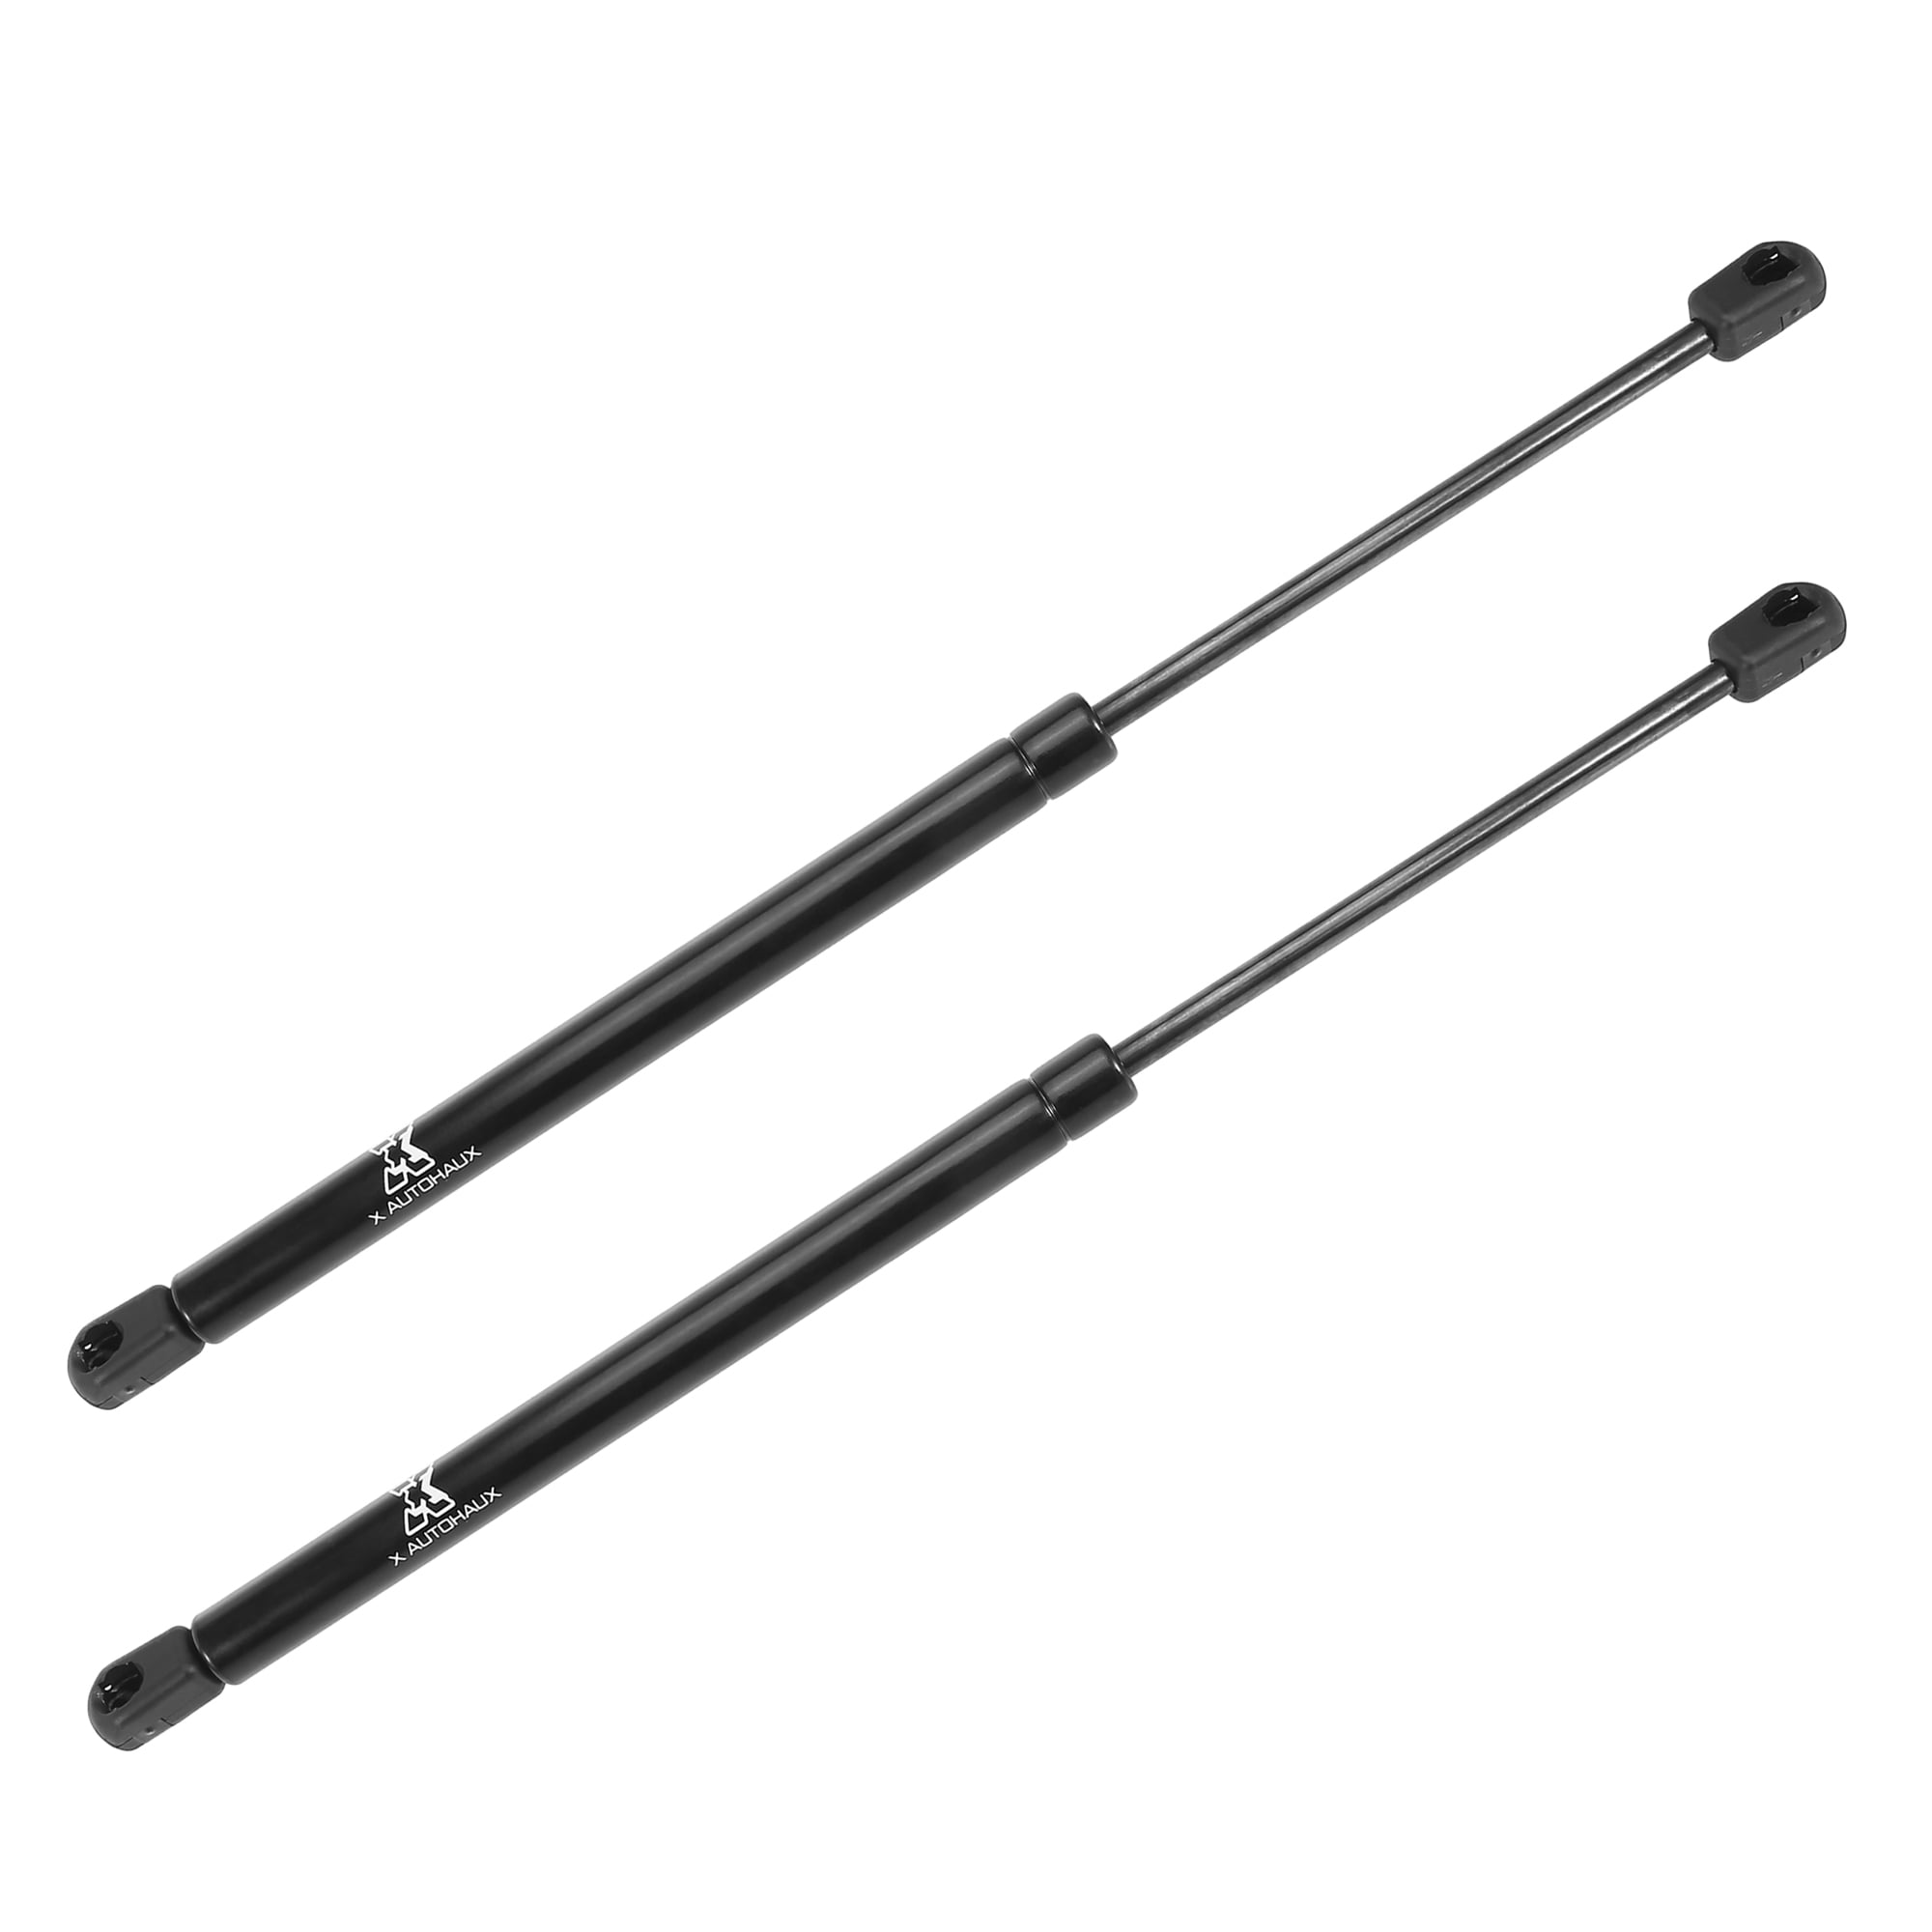 gas lift support,Gas Spring for Automotive,Automotive Gas Spring